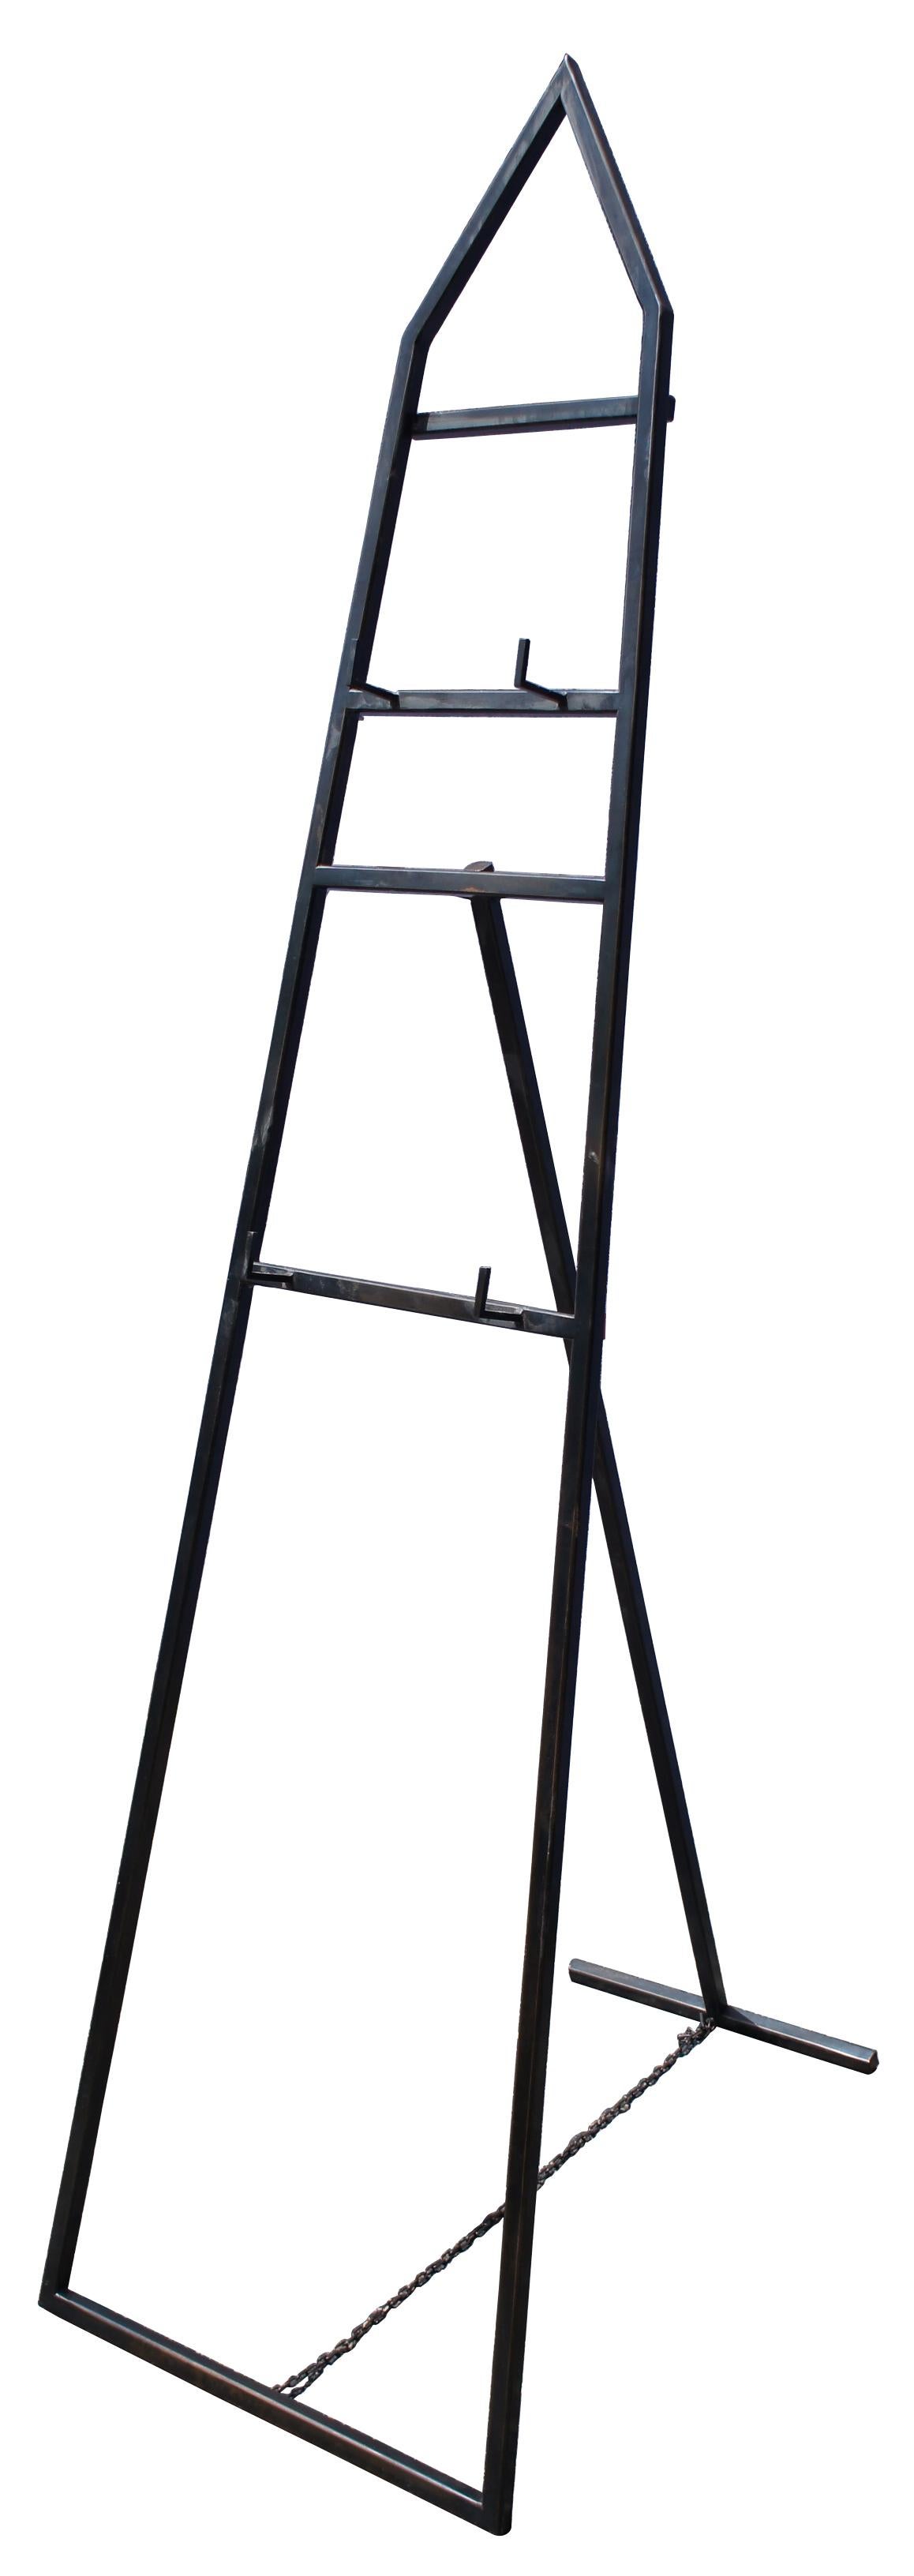 Black metal obelisk shaped display stand with two easel shelves for displaying multiple pieces of art. Measure: 74